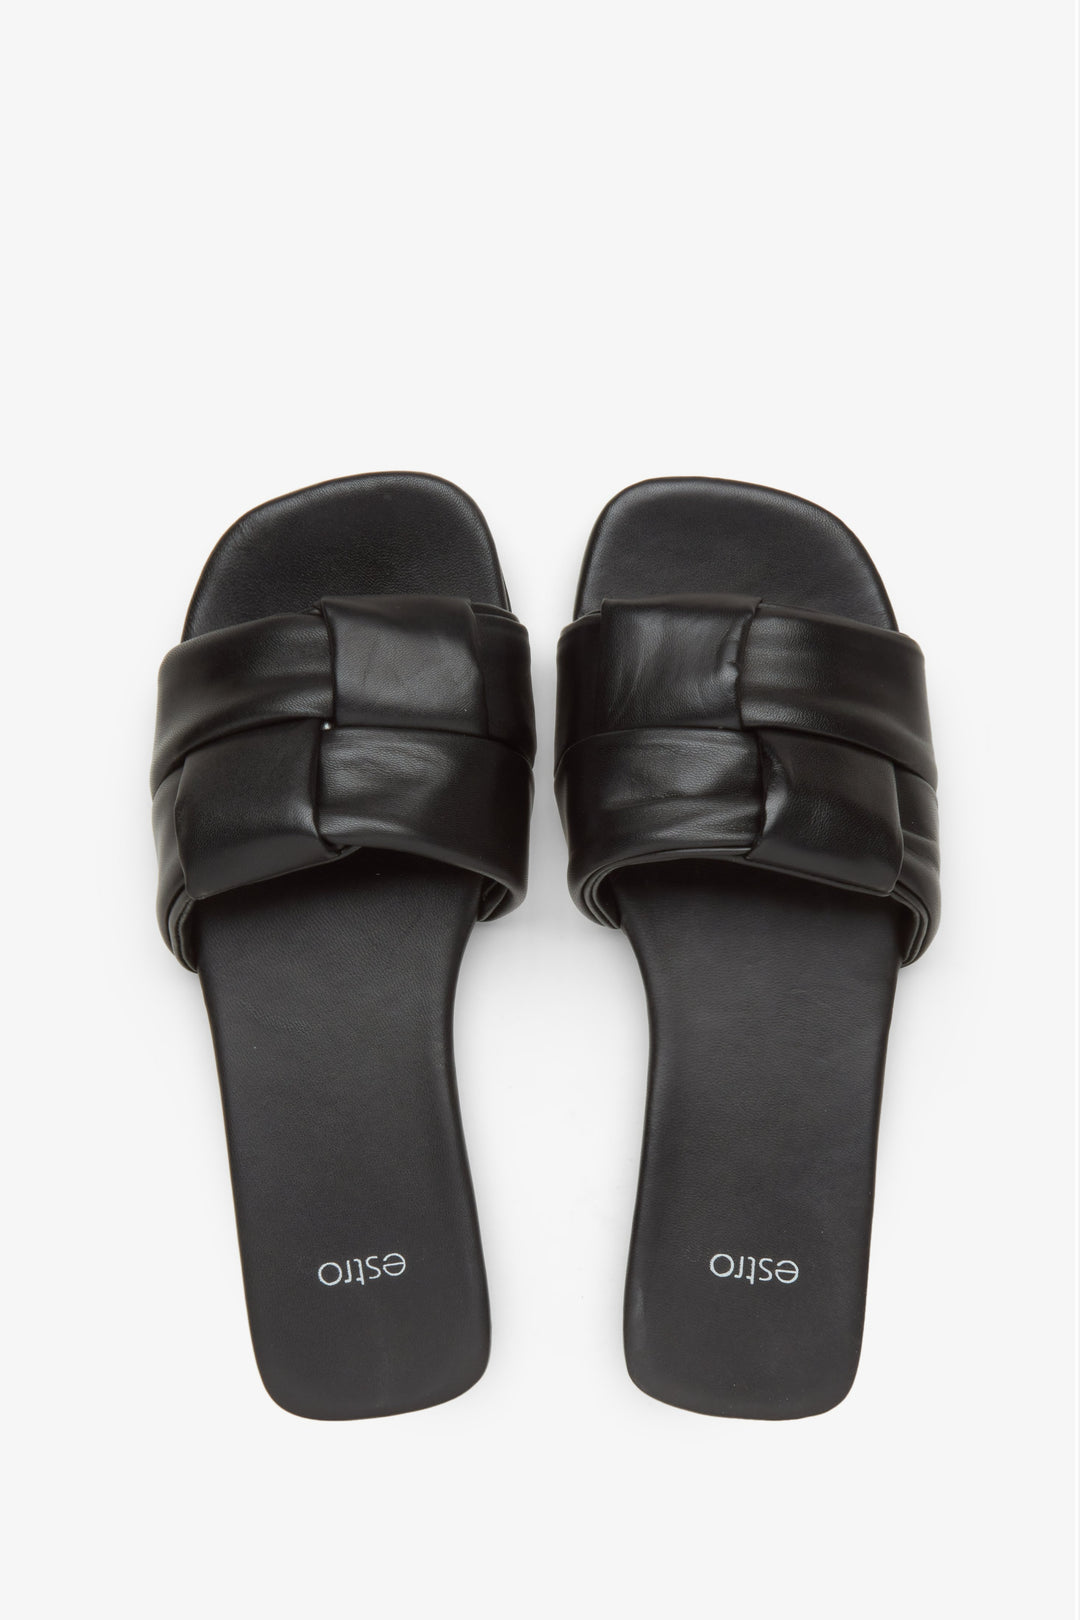 Slide Sandals for Women in Black Patch Leather by Estro